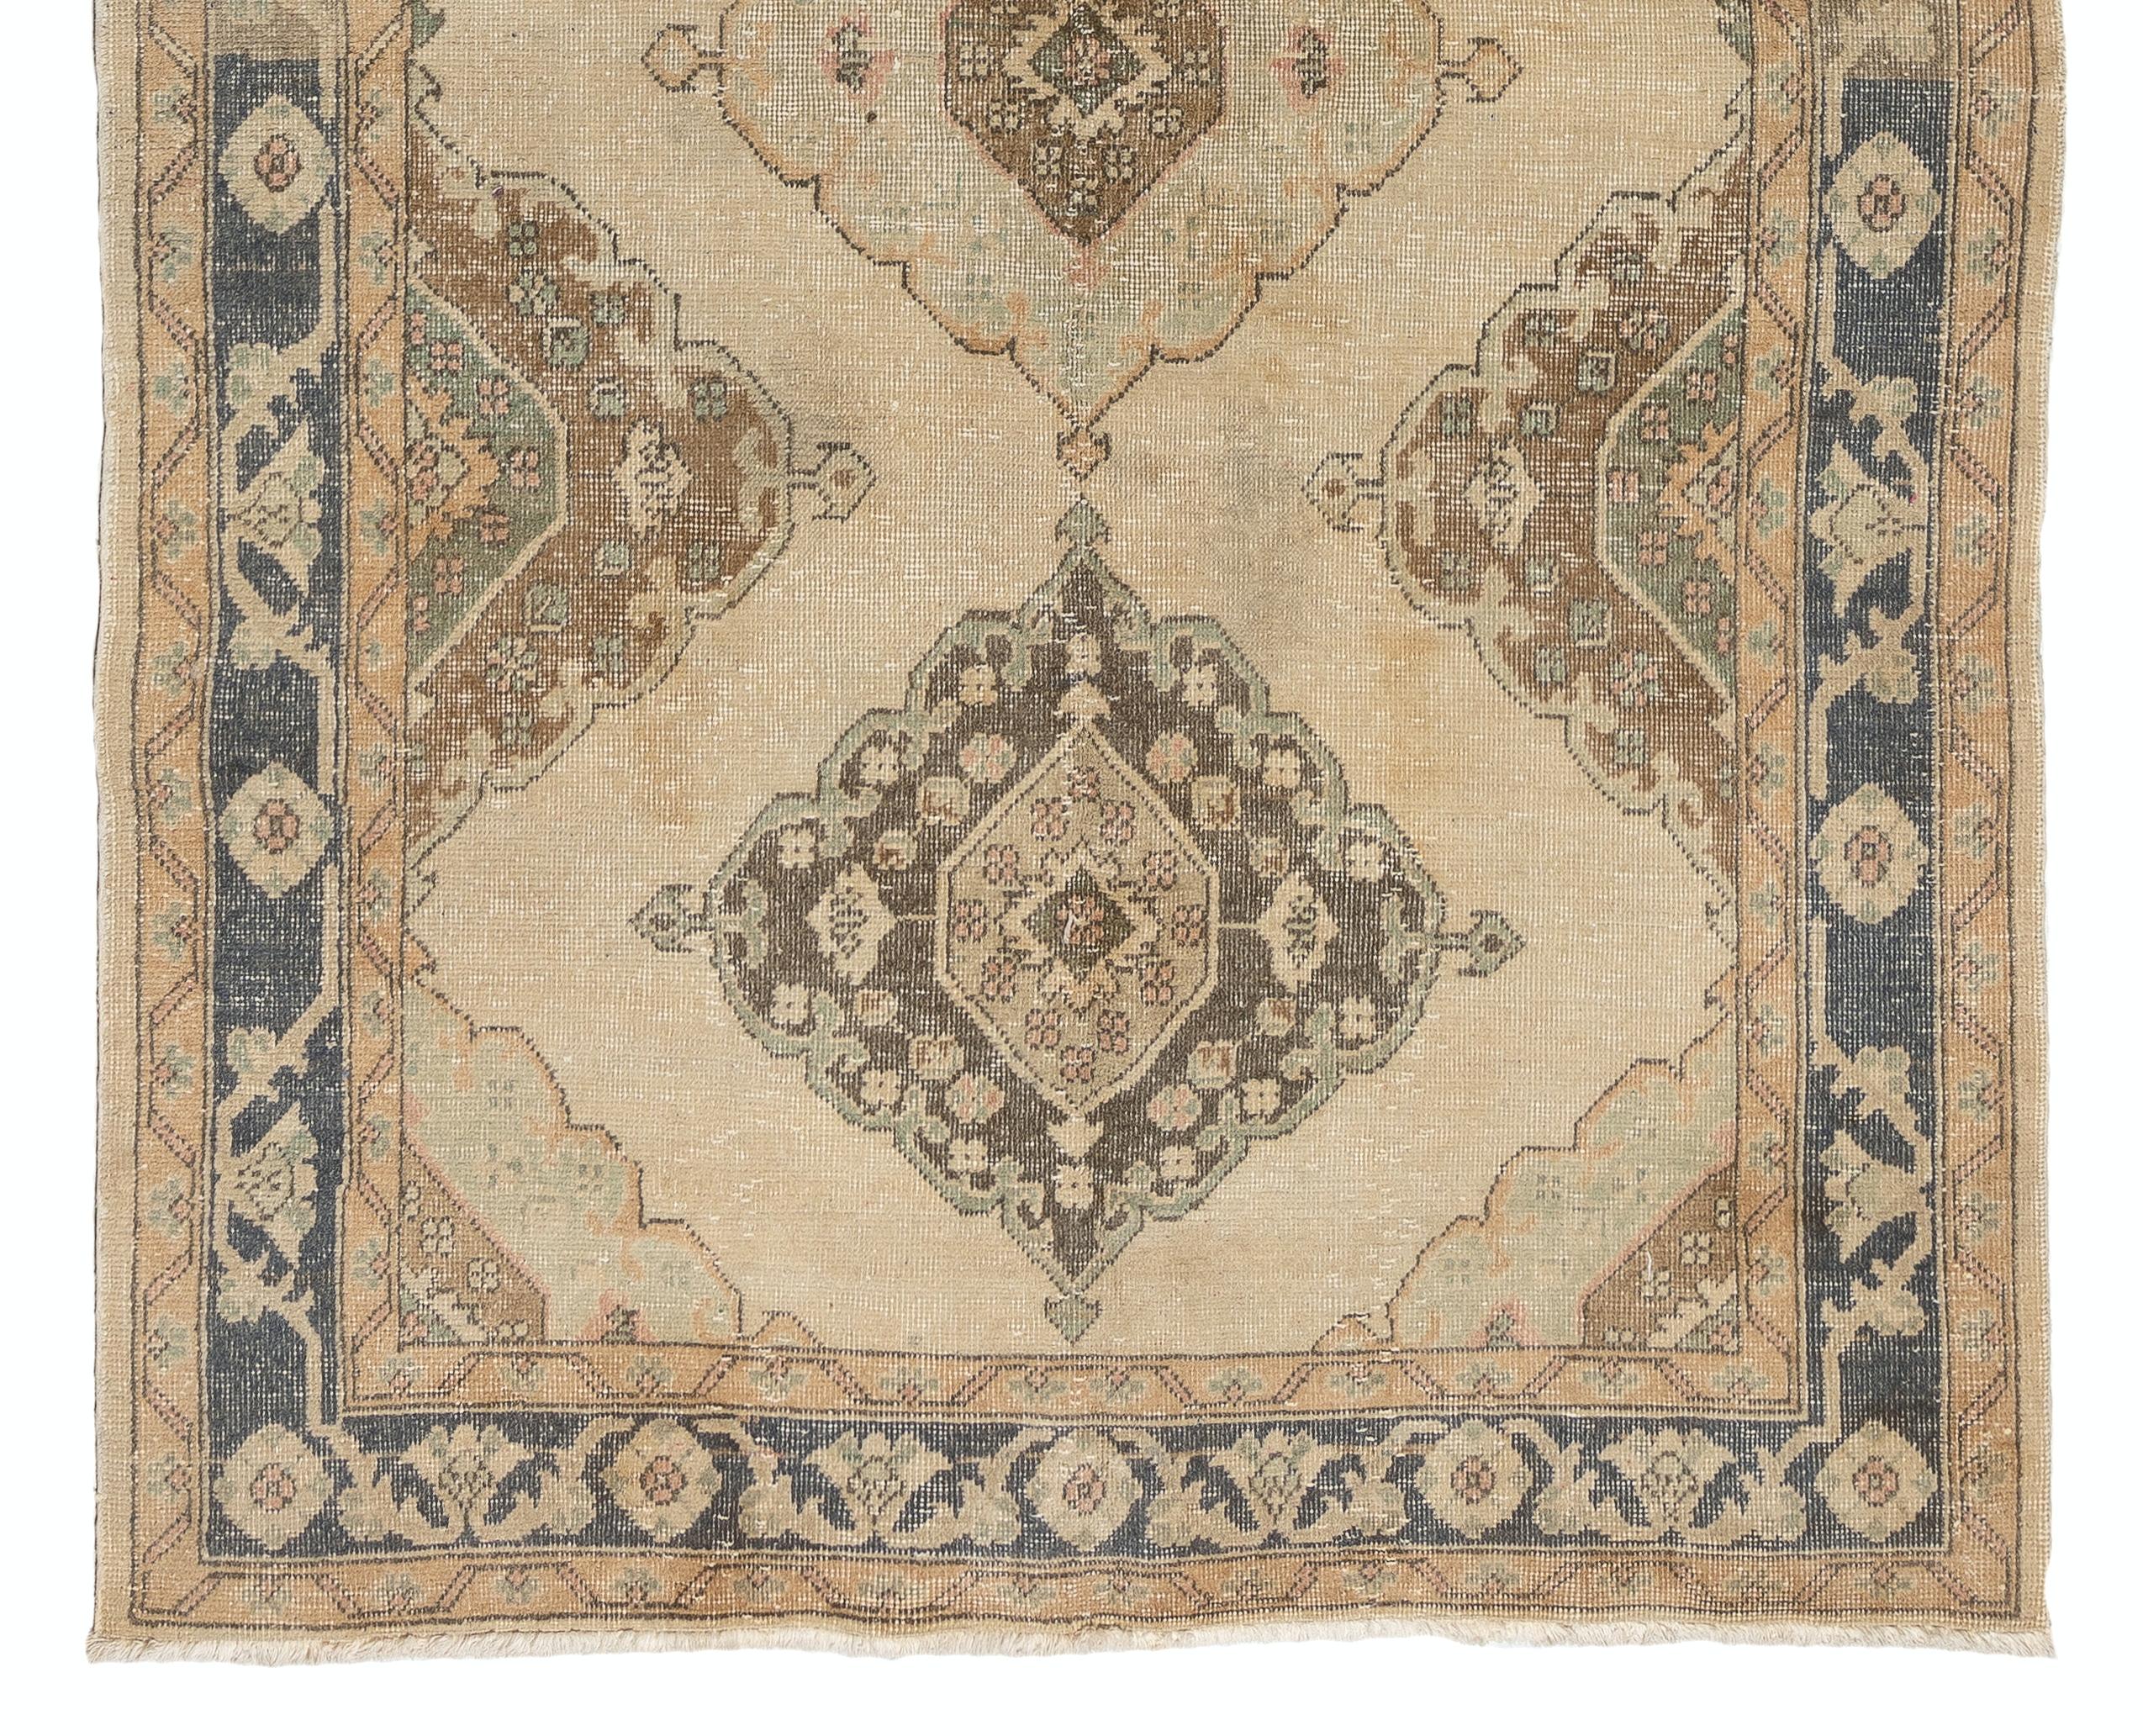 A vintage Turkish runner rug in neutral colors. It was hand-knotted in the 1960s with low wool on cotton foundation and features a multiple medallion design. It is in very good condition, professionally-washed, sturdy and suitable for areas with